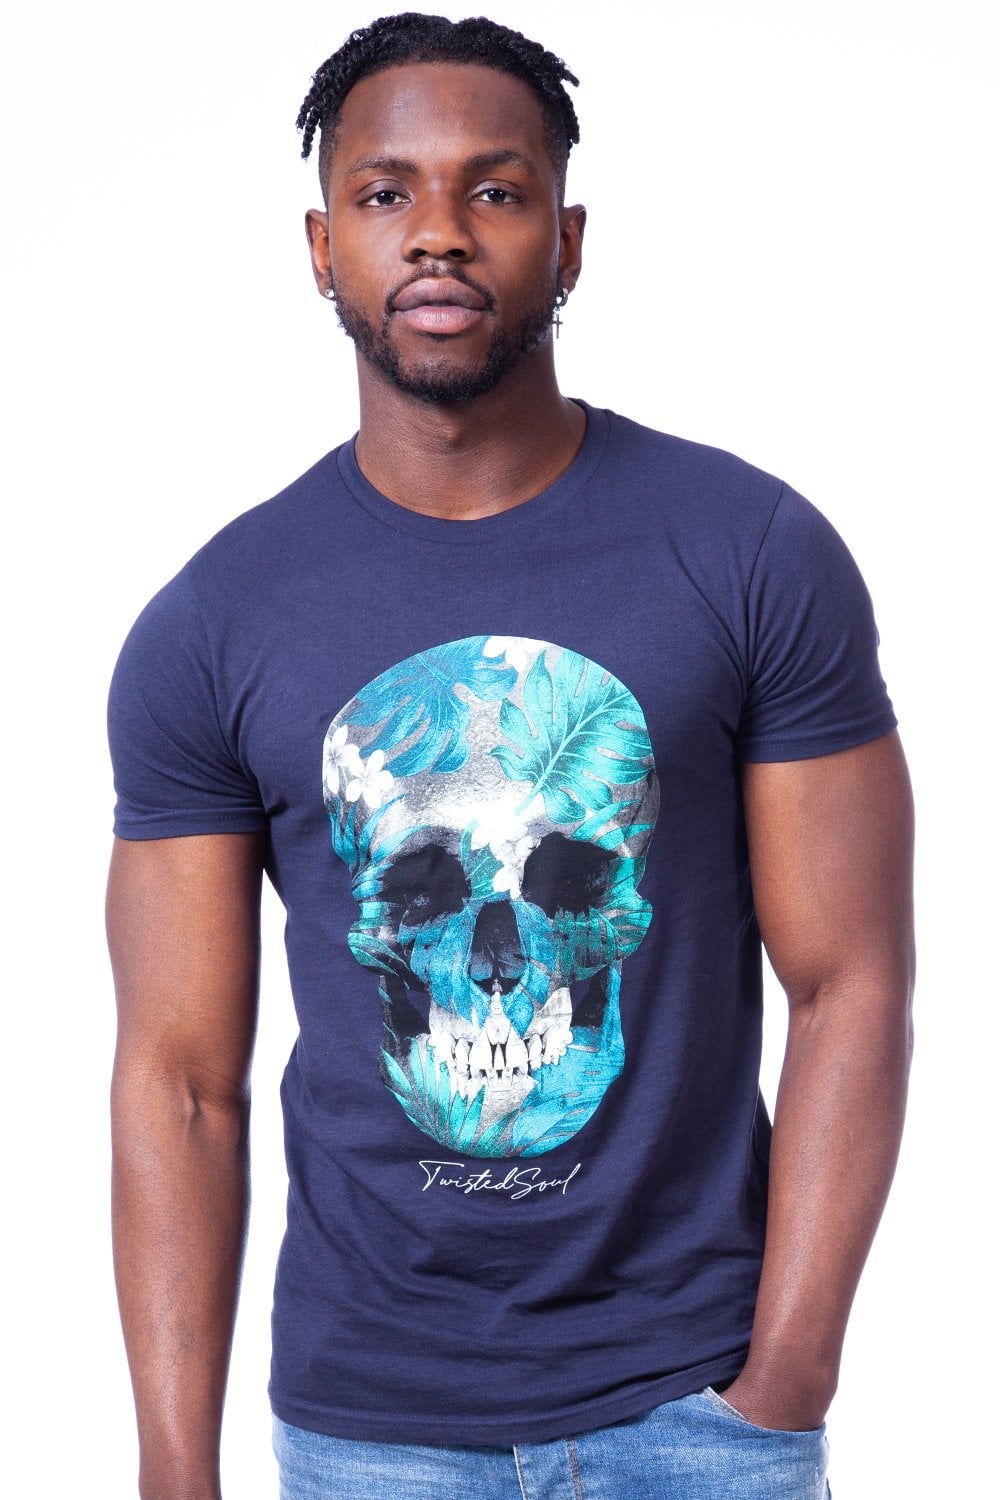 Tropical T-Shirt - Twisted Soul | Men's Clothing